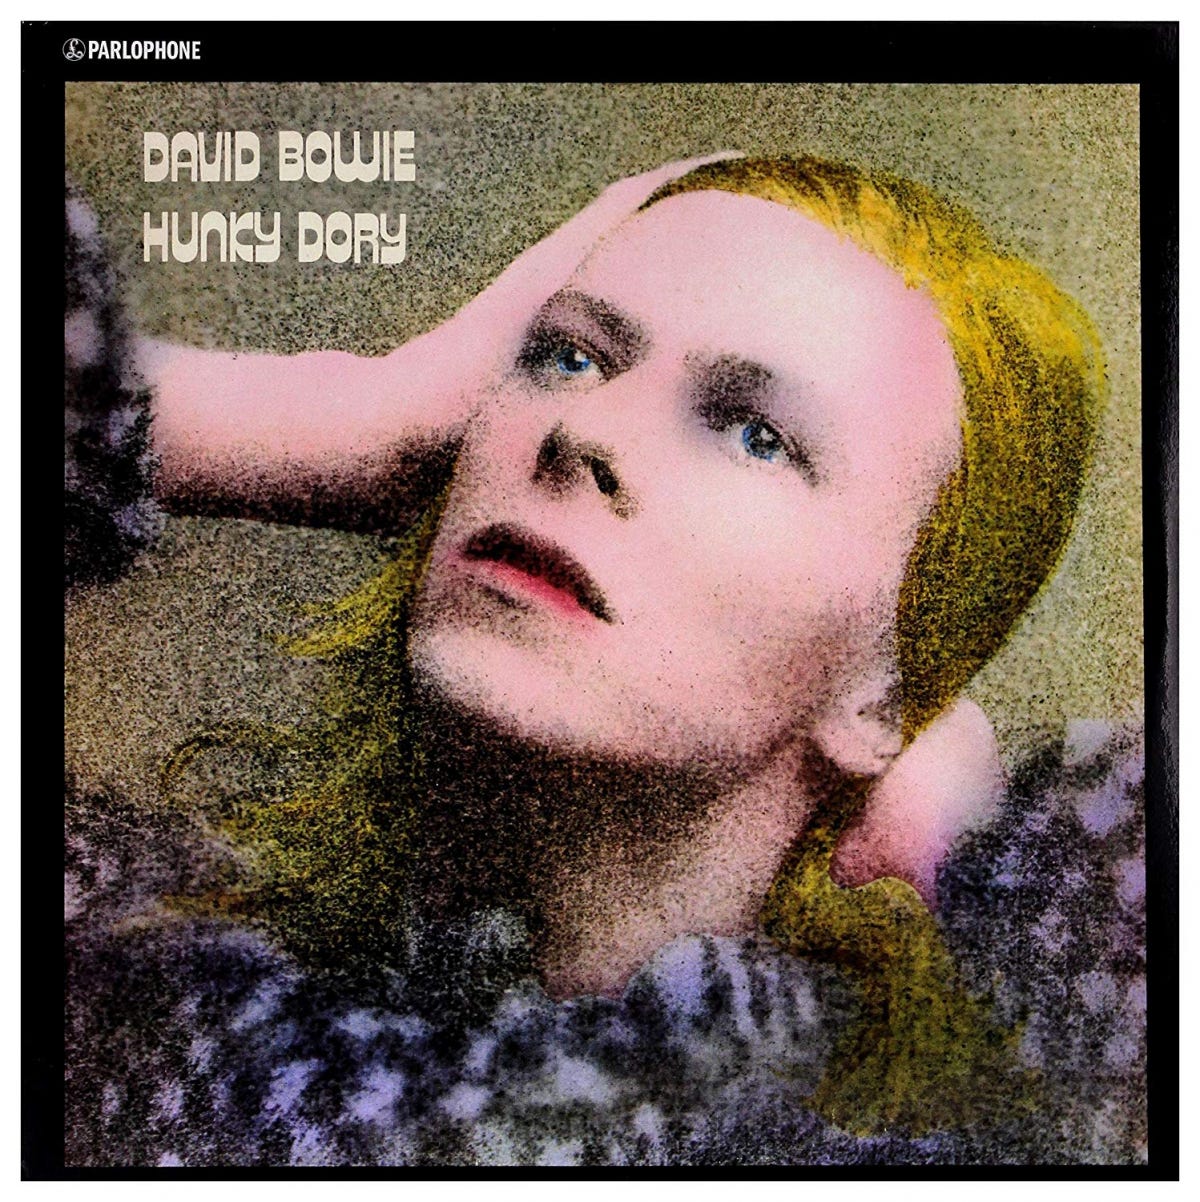 Discography: David Bowie: Hunky Dory - Spectrum Culture